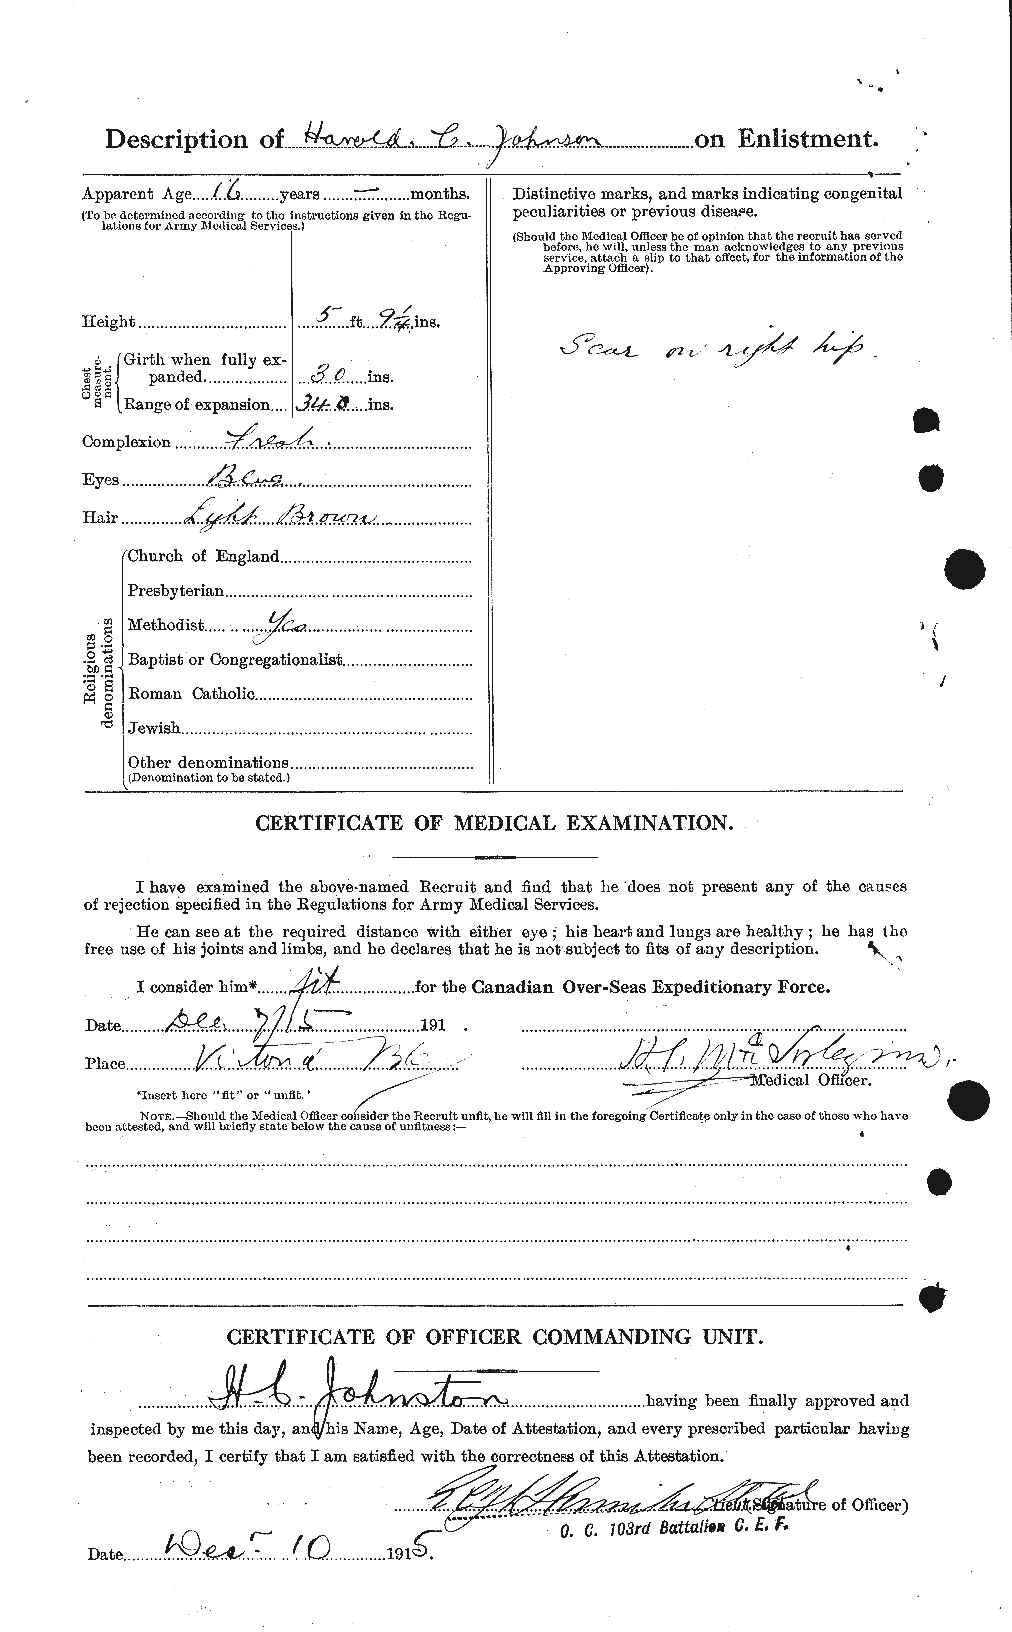 Personnel Records of the First World War - CEF 419488b